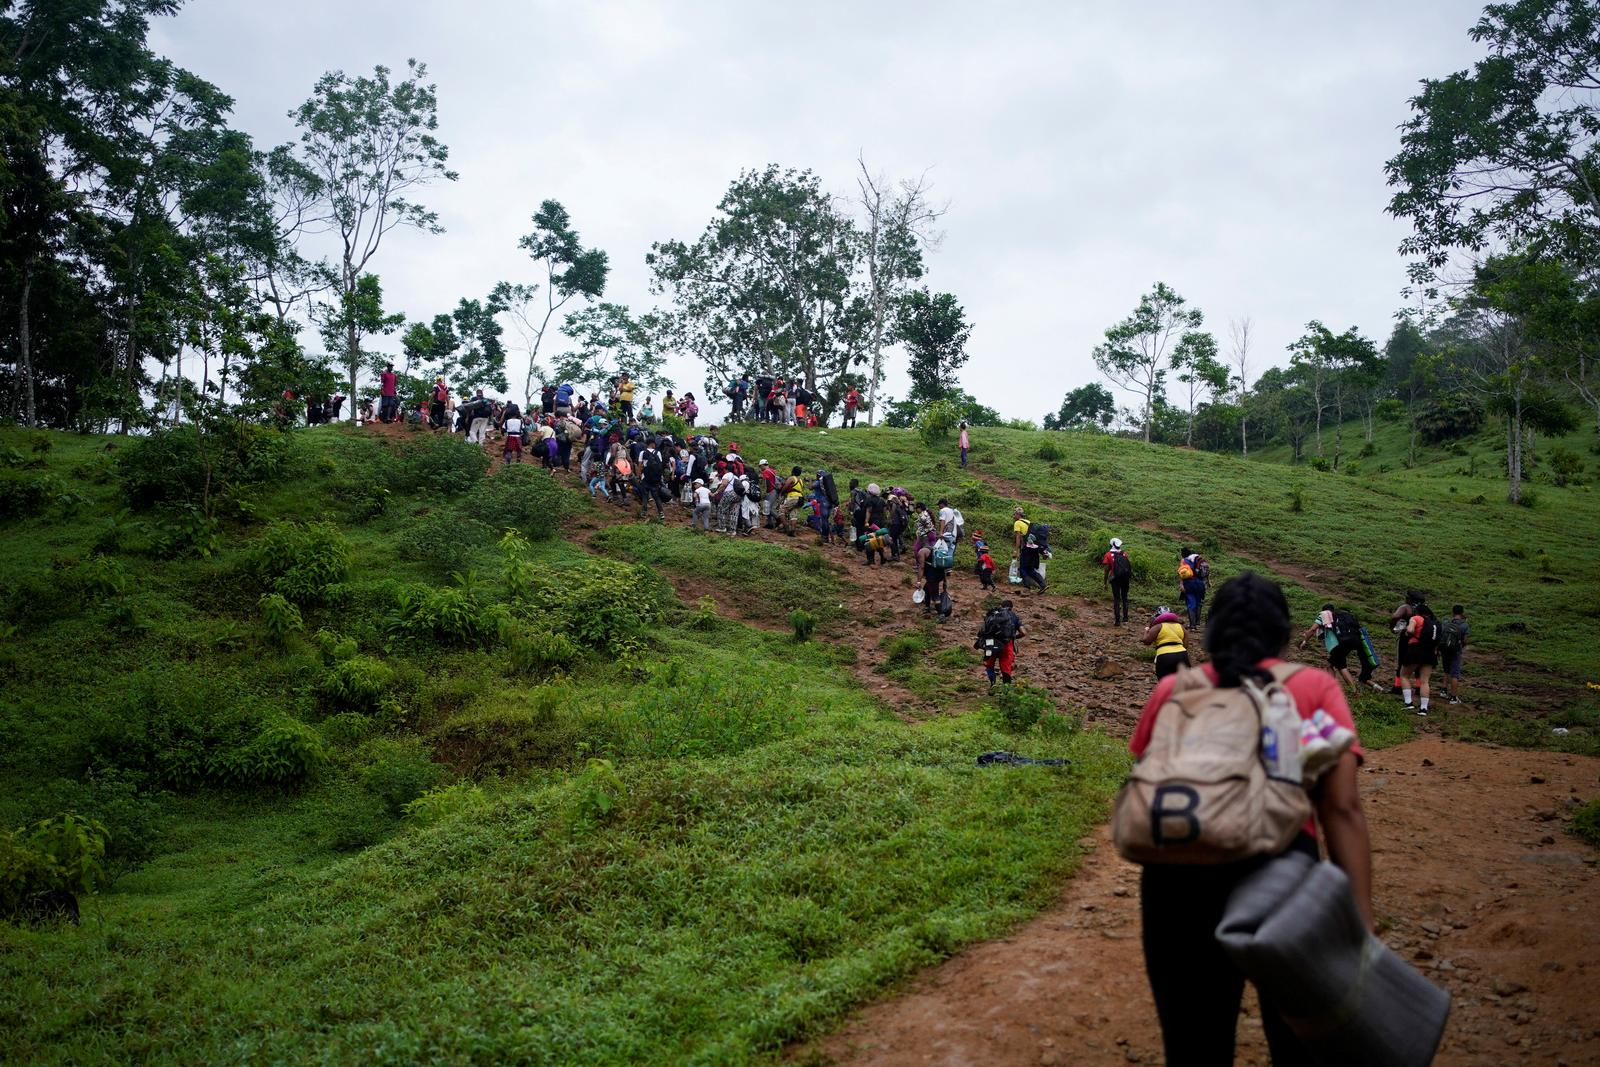 A group of migrants from different countries walk through the Darien Gap, as they continue their journey to the U.S. border, in Acandi, Colombia July 9, 2023. REUTERS/Adri Salido NO RESALES. NO ARCHIVES Photo: Stringer/REUTERS